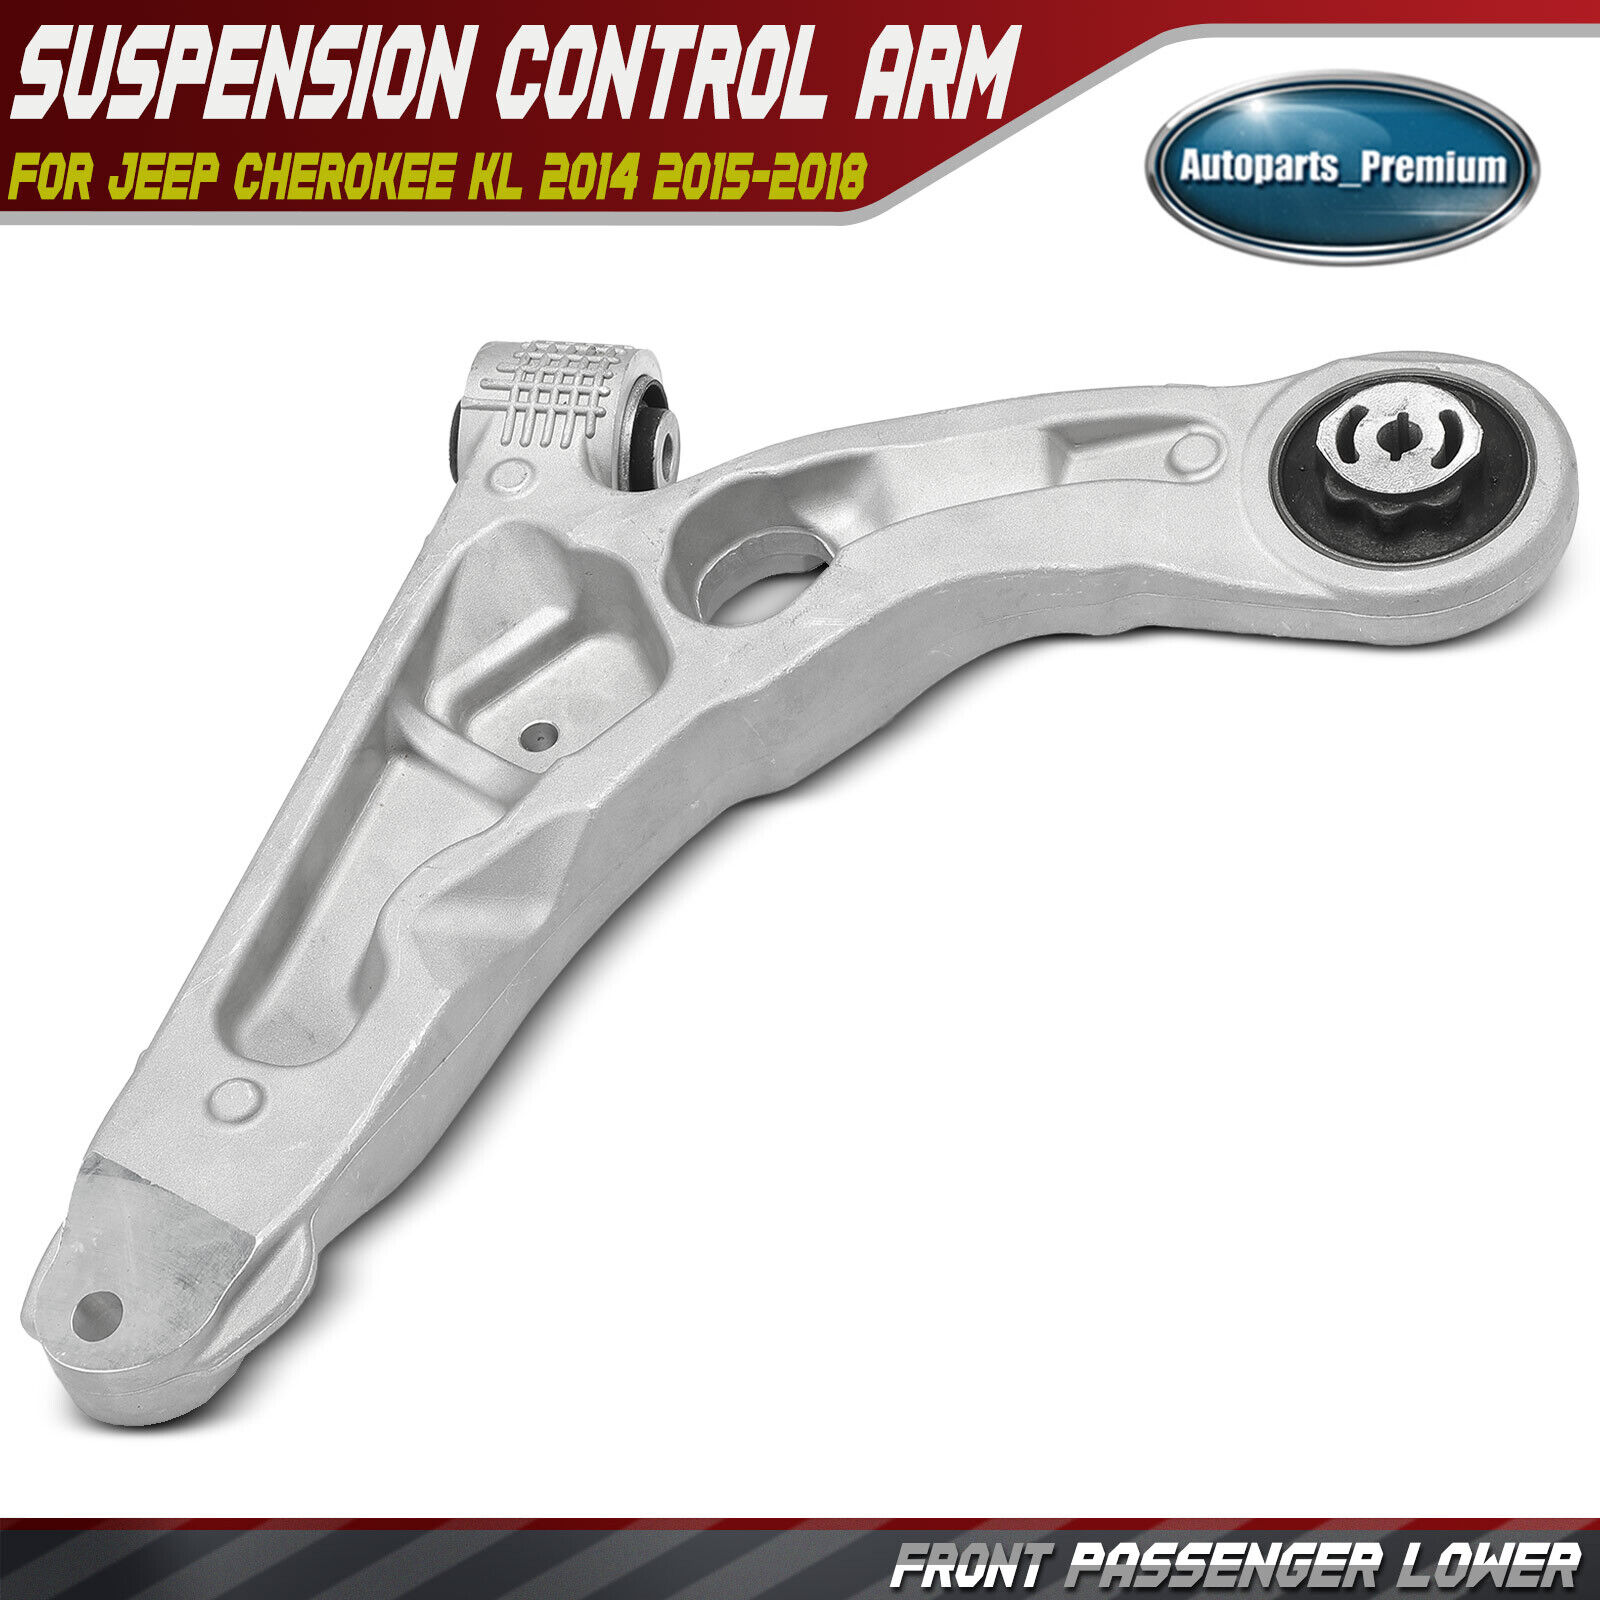 New Front Right Lower Suspension Control Arm for Jeep Cherokee KL 2014 2015-2018